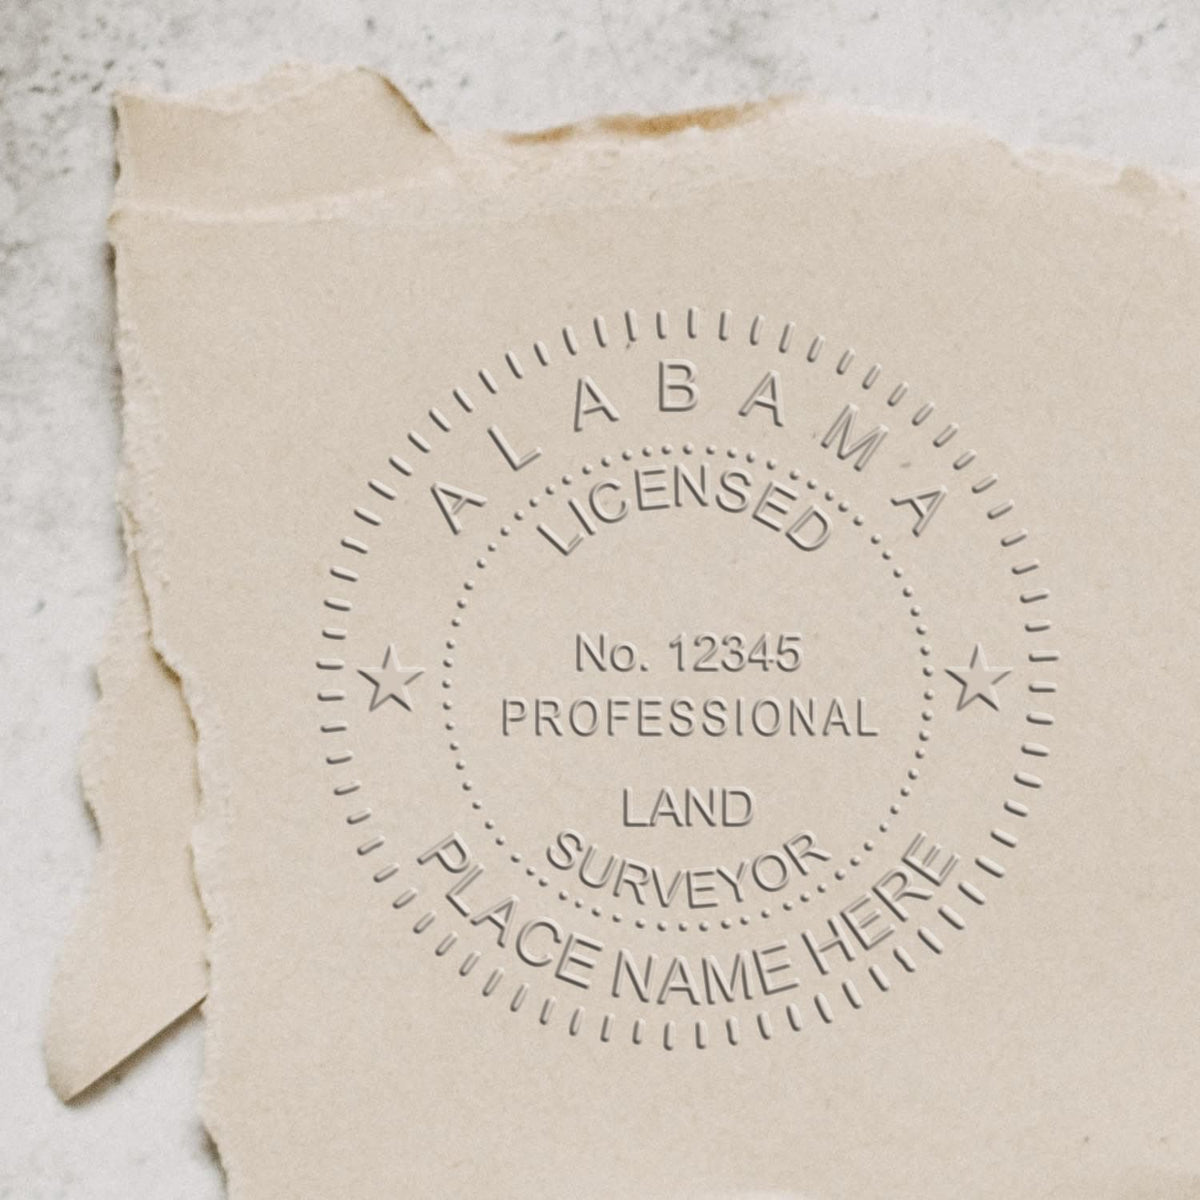 The Long Reach Alabama Land Surveyor Seal stamp impression comes to life with a crisp, detailed photo on paper - showcasing true professional quality.